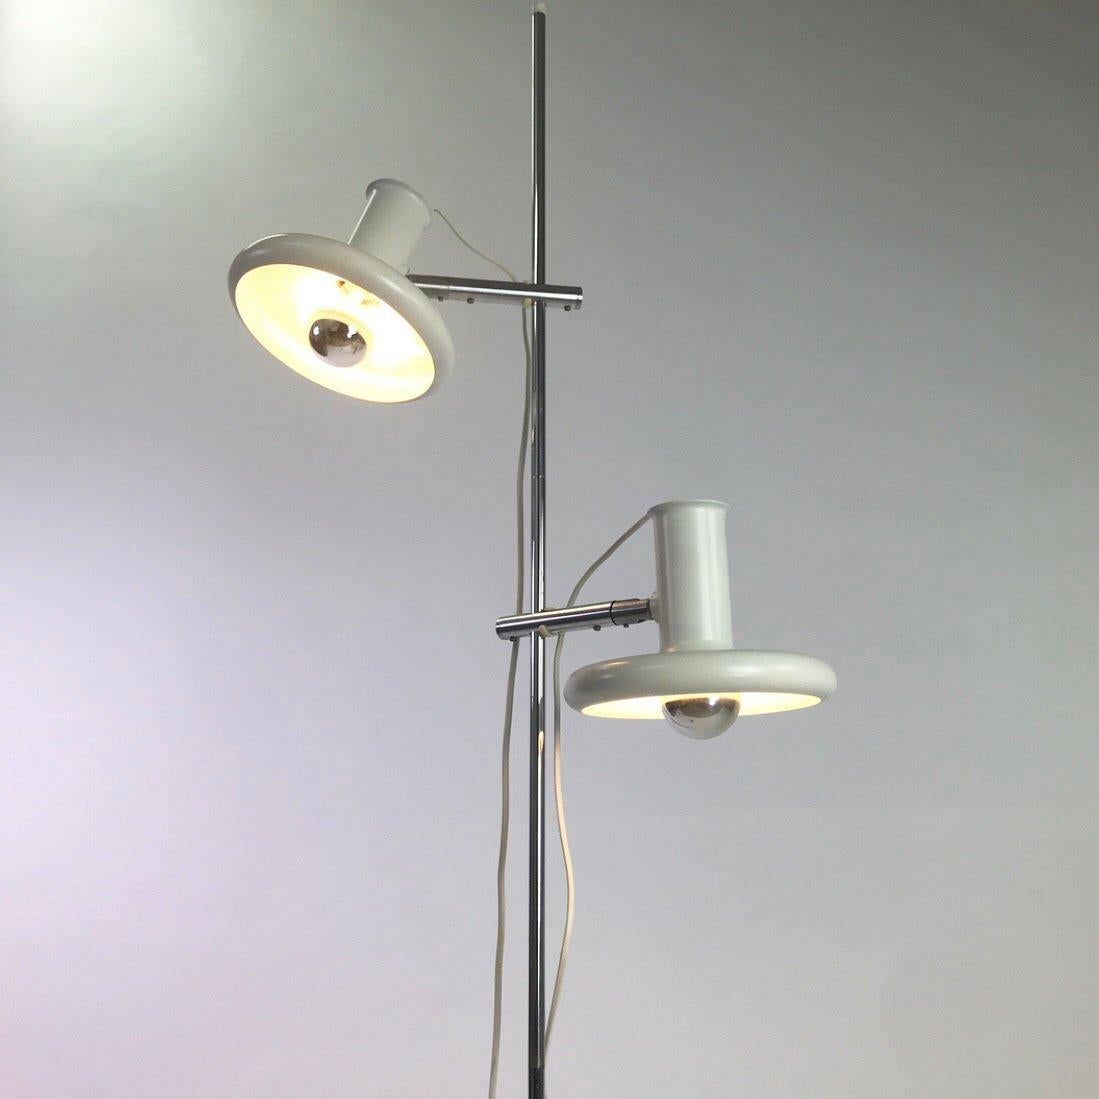 Classic Danish Floor Lamp from the 1970s by Hans Due for Fog & Mørup 1